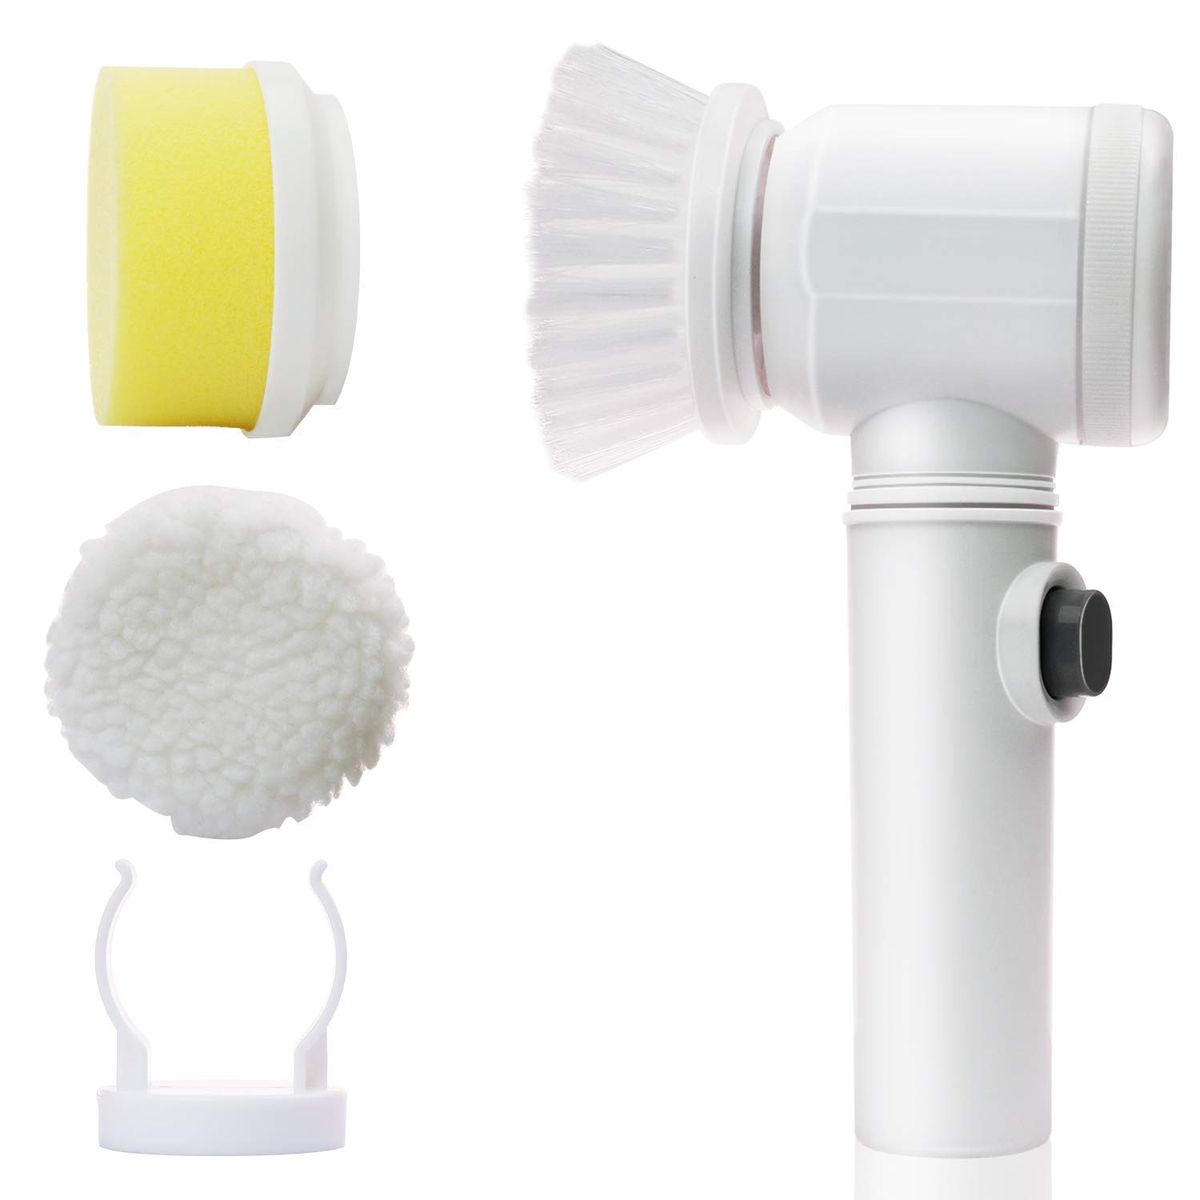 Handheld Electric Cleaning Brush, Kitchen Houseware Pot & Dish Scrubber  With Waterproof Multi-functional Brush Head